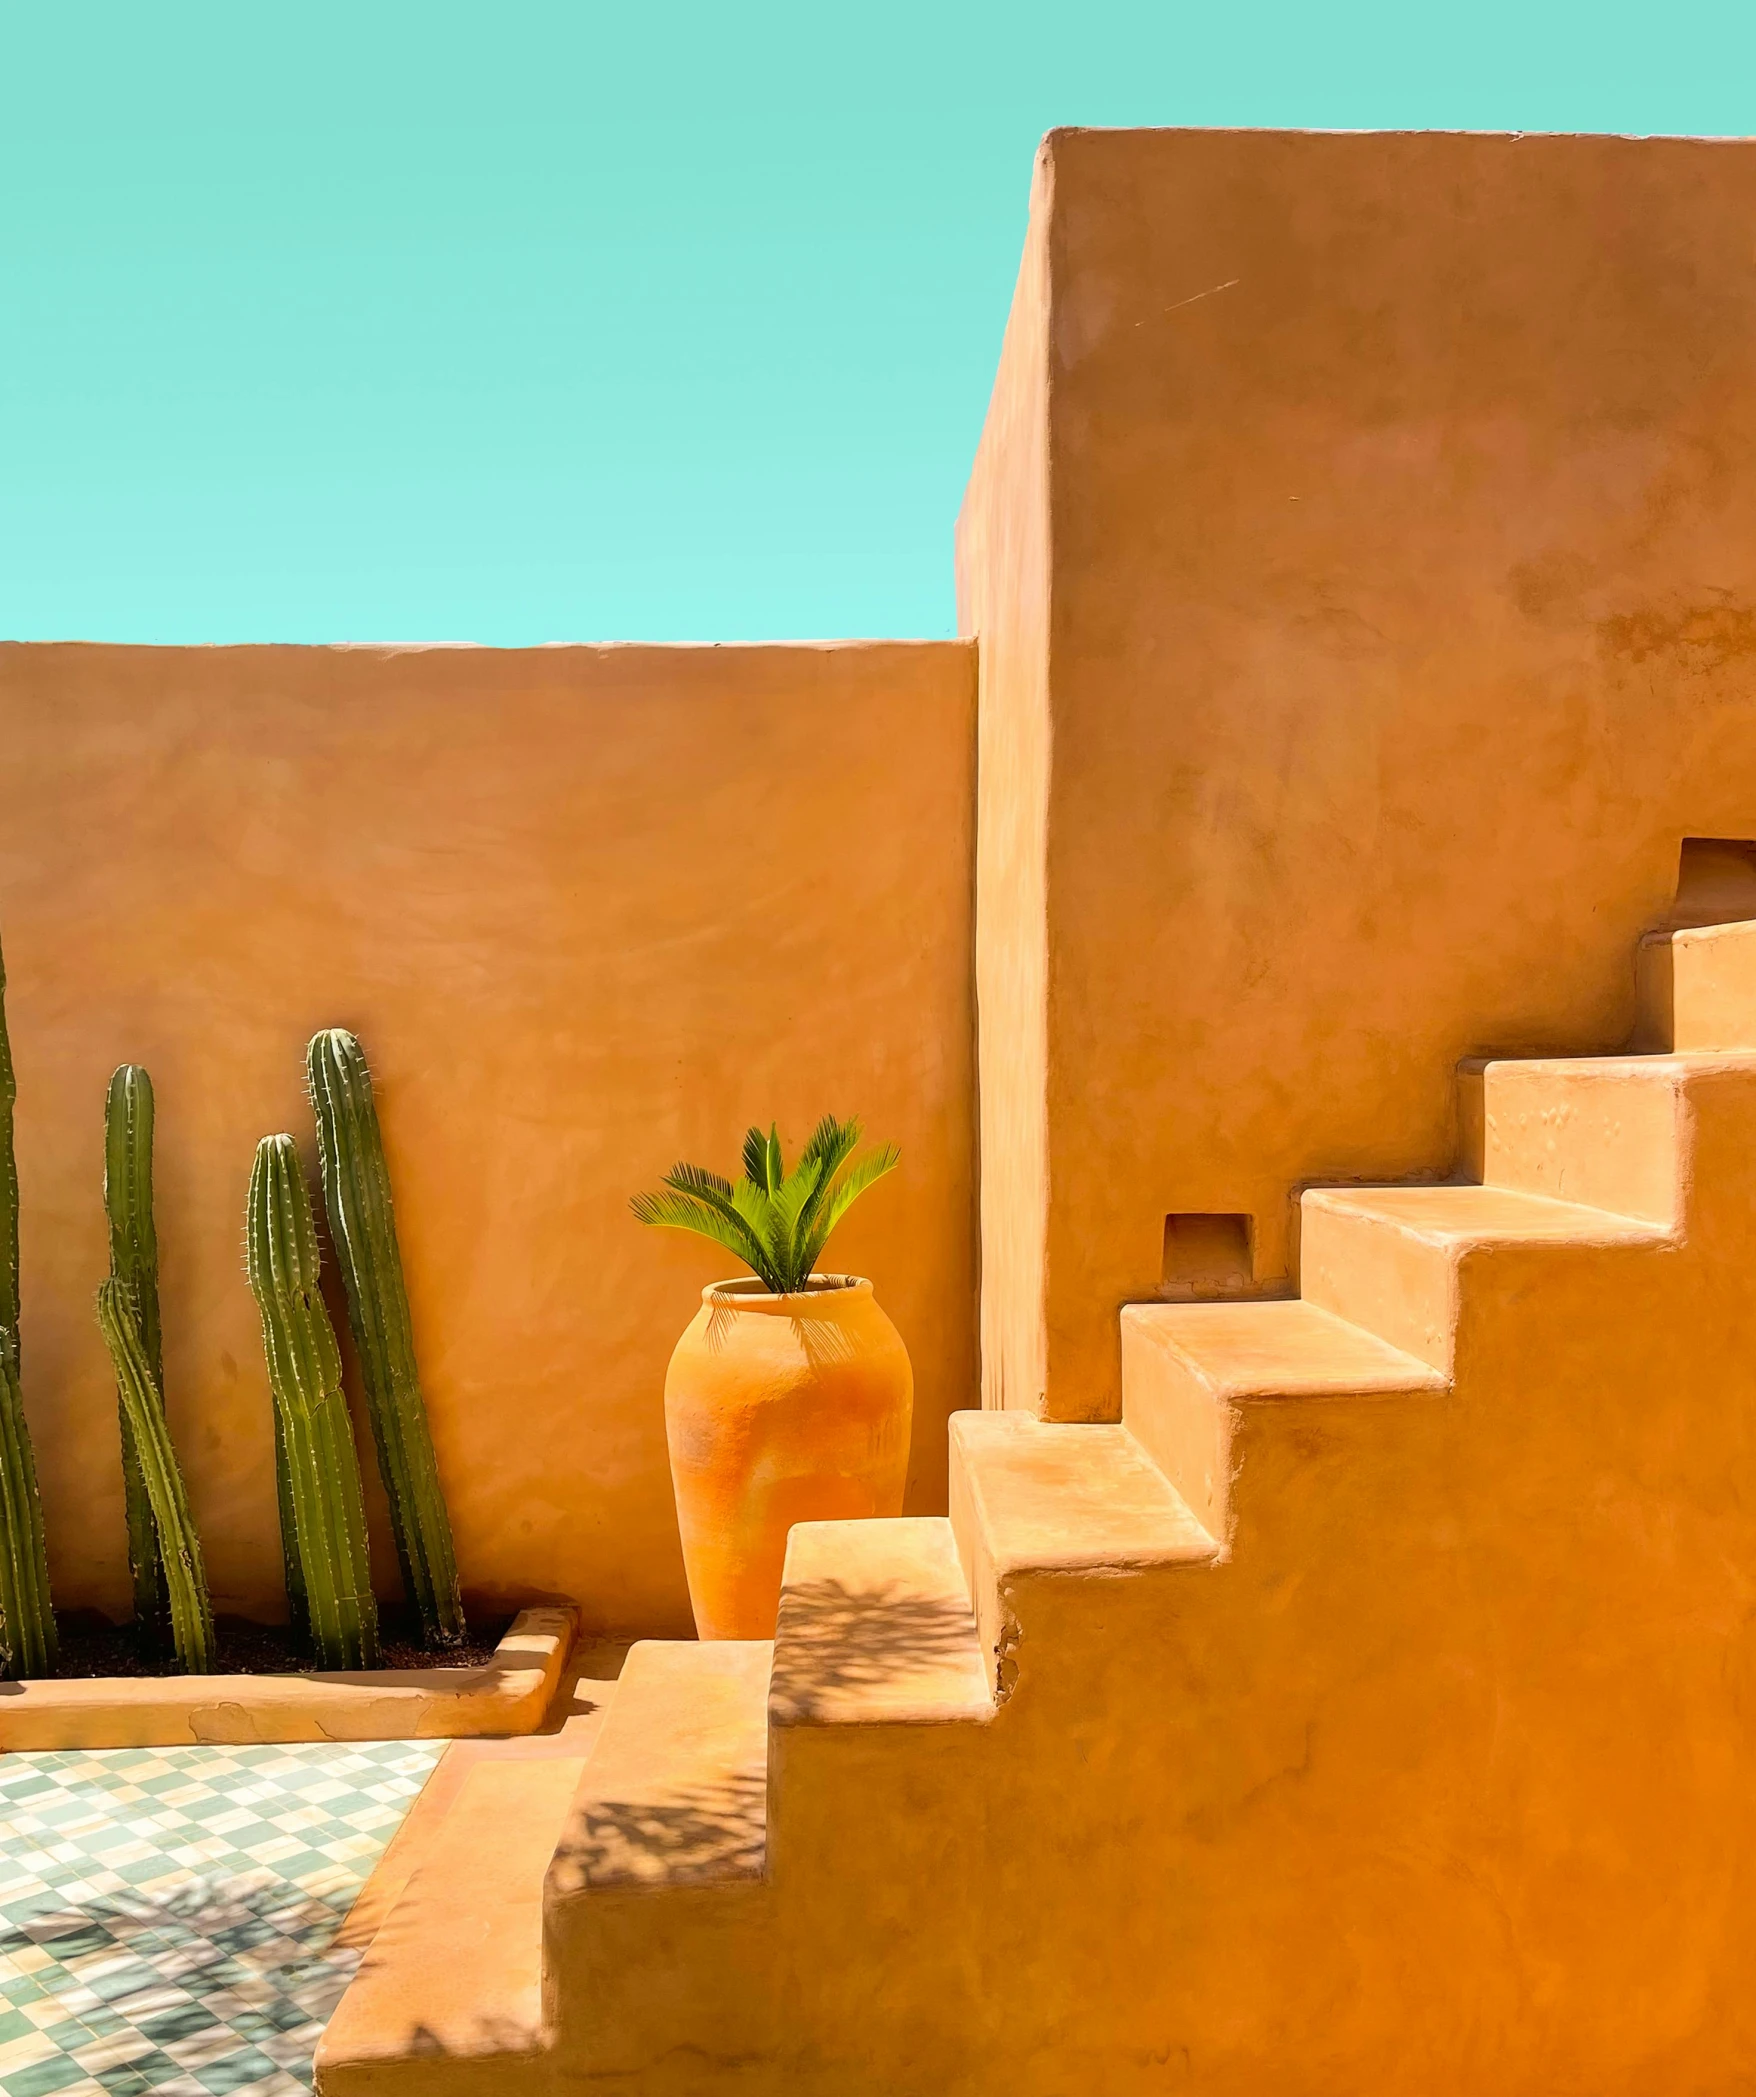 a painting of steps leading up to some tall cactus